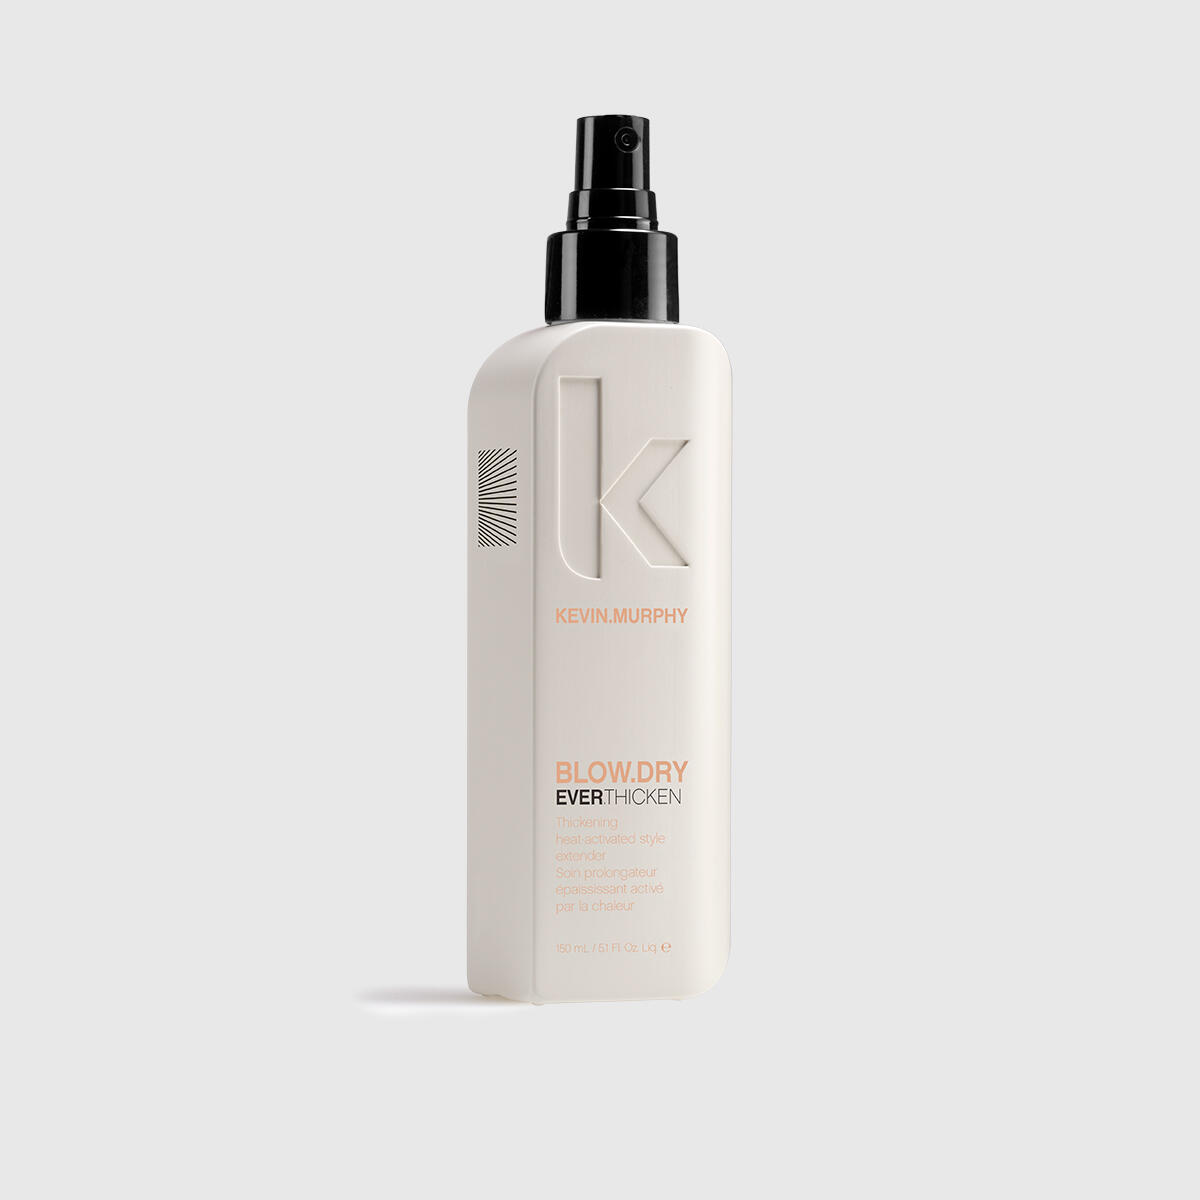 Kevin Murphy Blow Dry Ever Thicken null